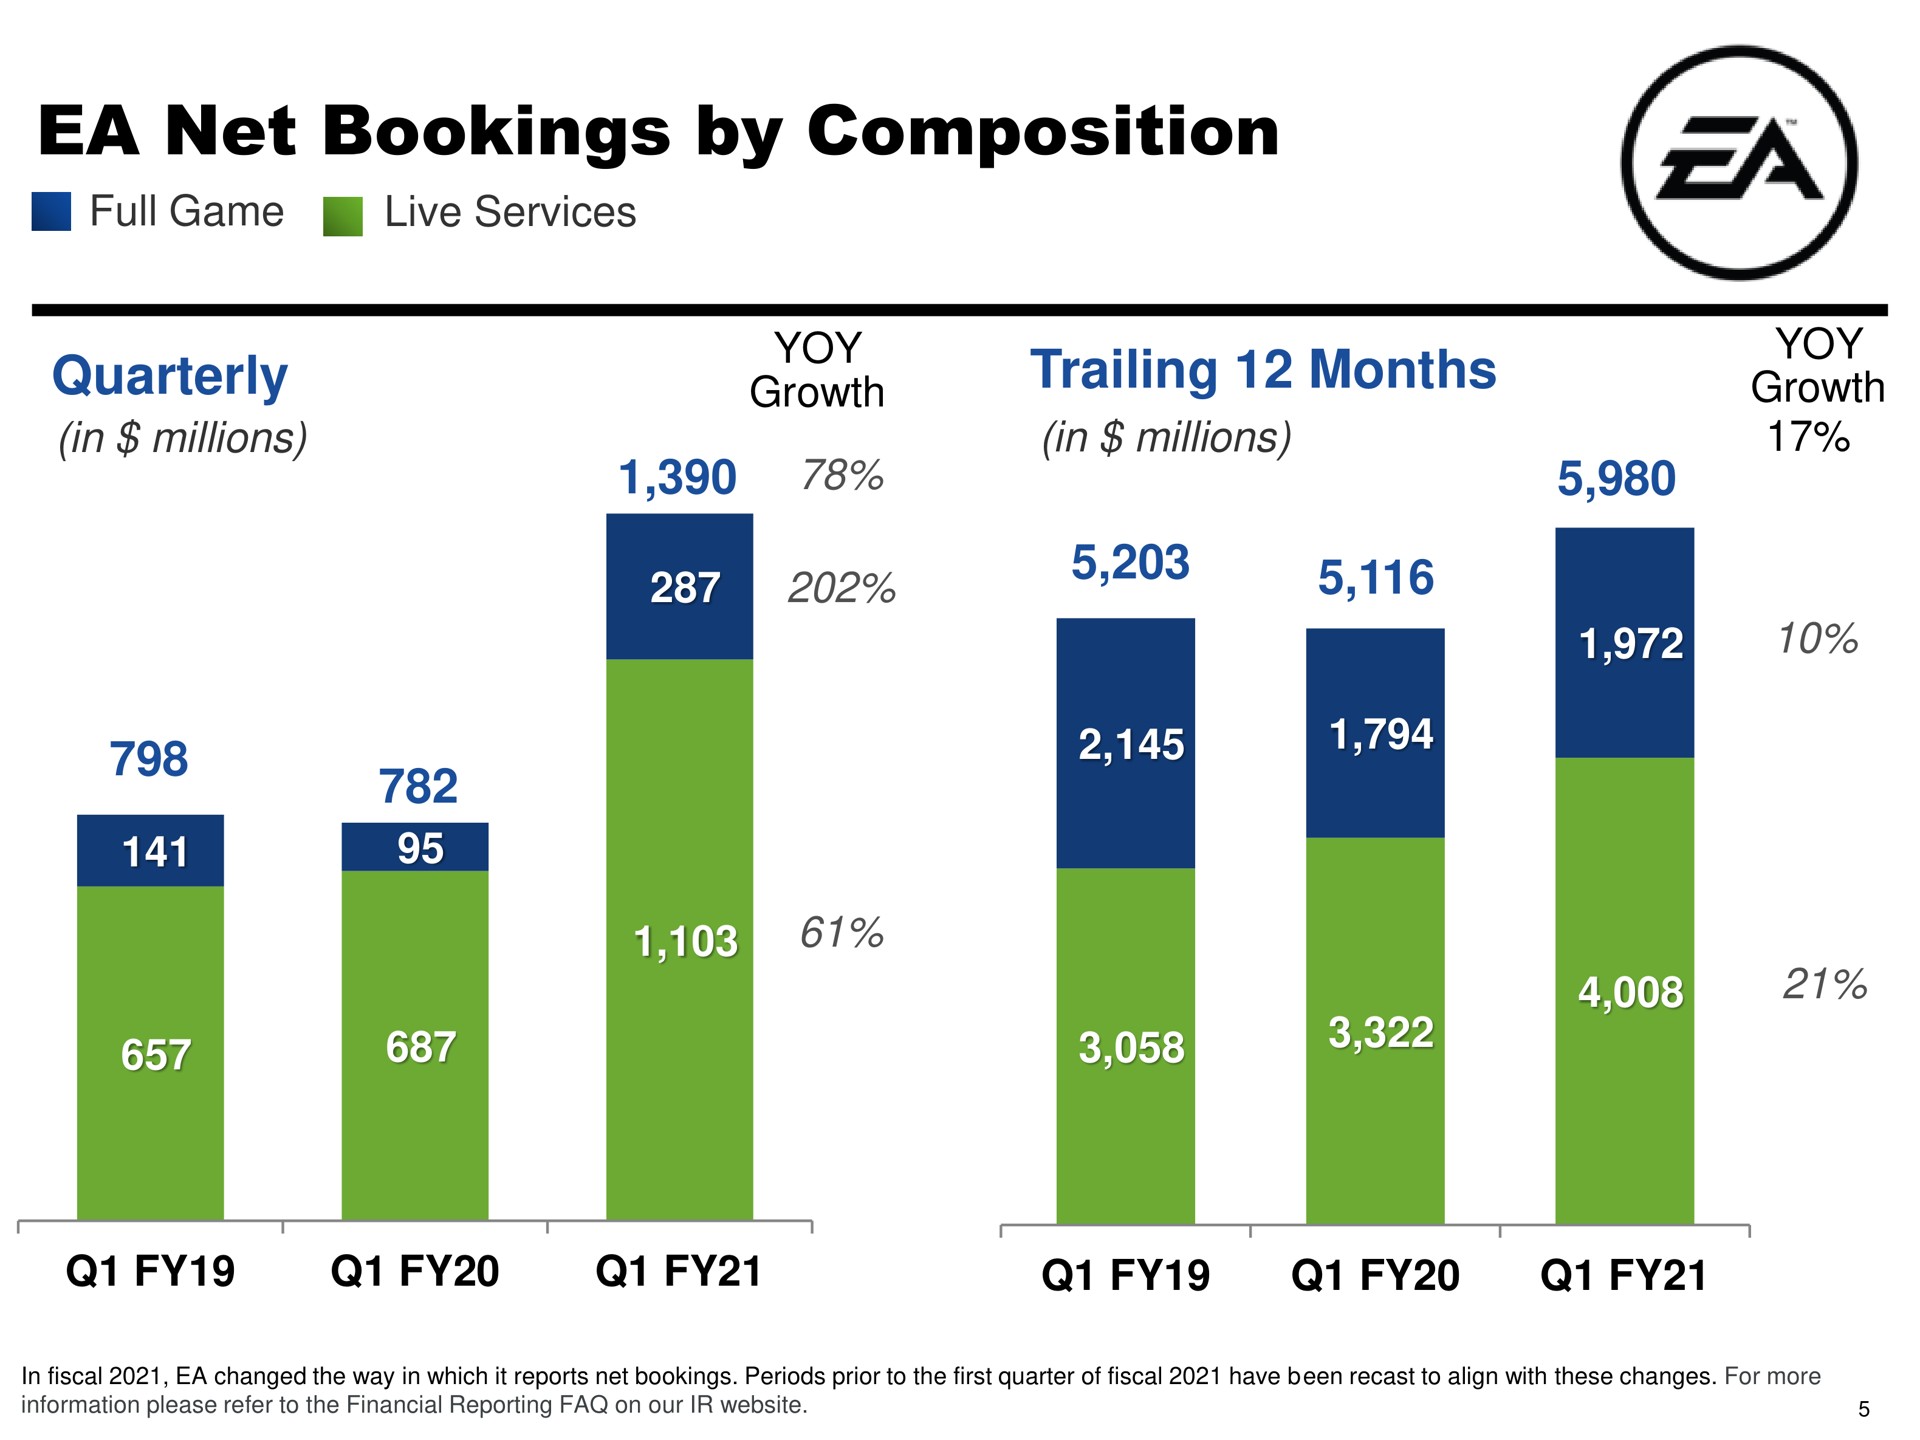 net bookings by composition | Electronic Arts